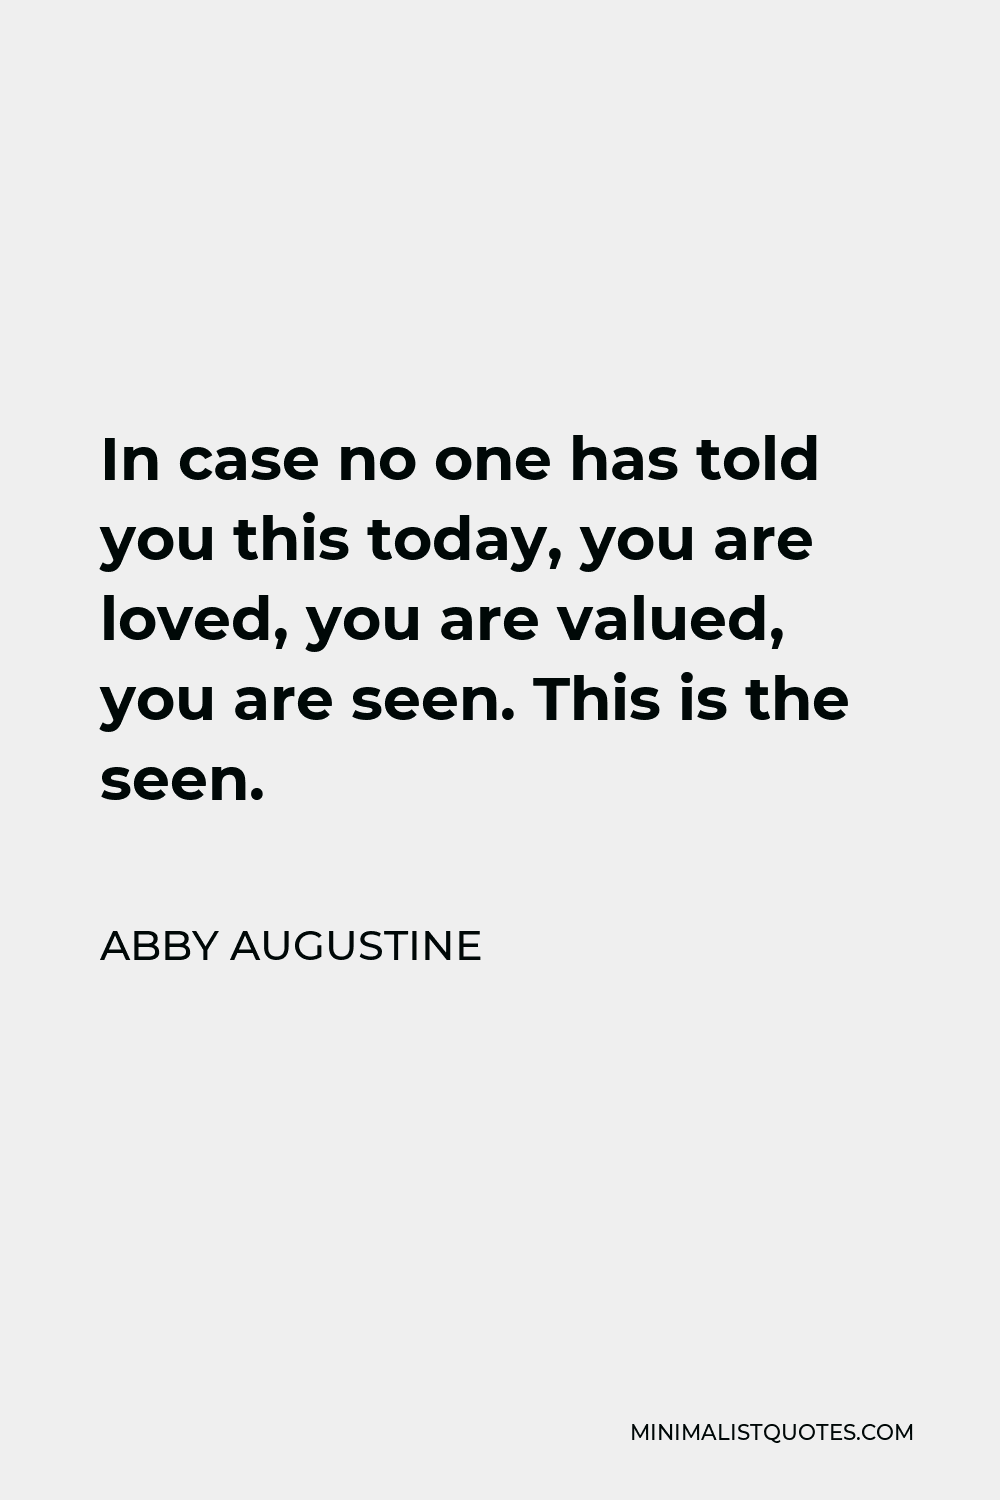 Abby Augustine Quote - In case no one has told you this today, you are loved, you are valued, you are seen. This is the seen.